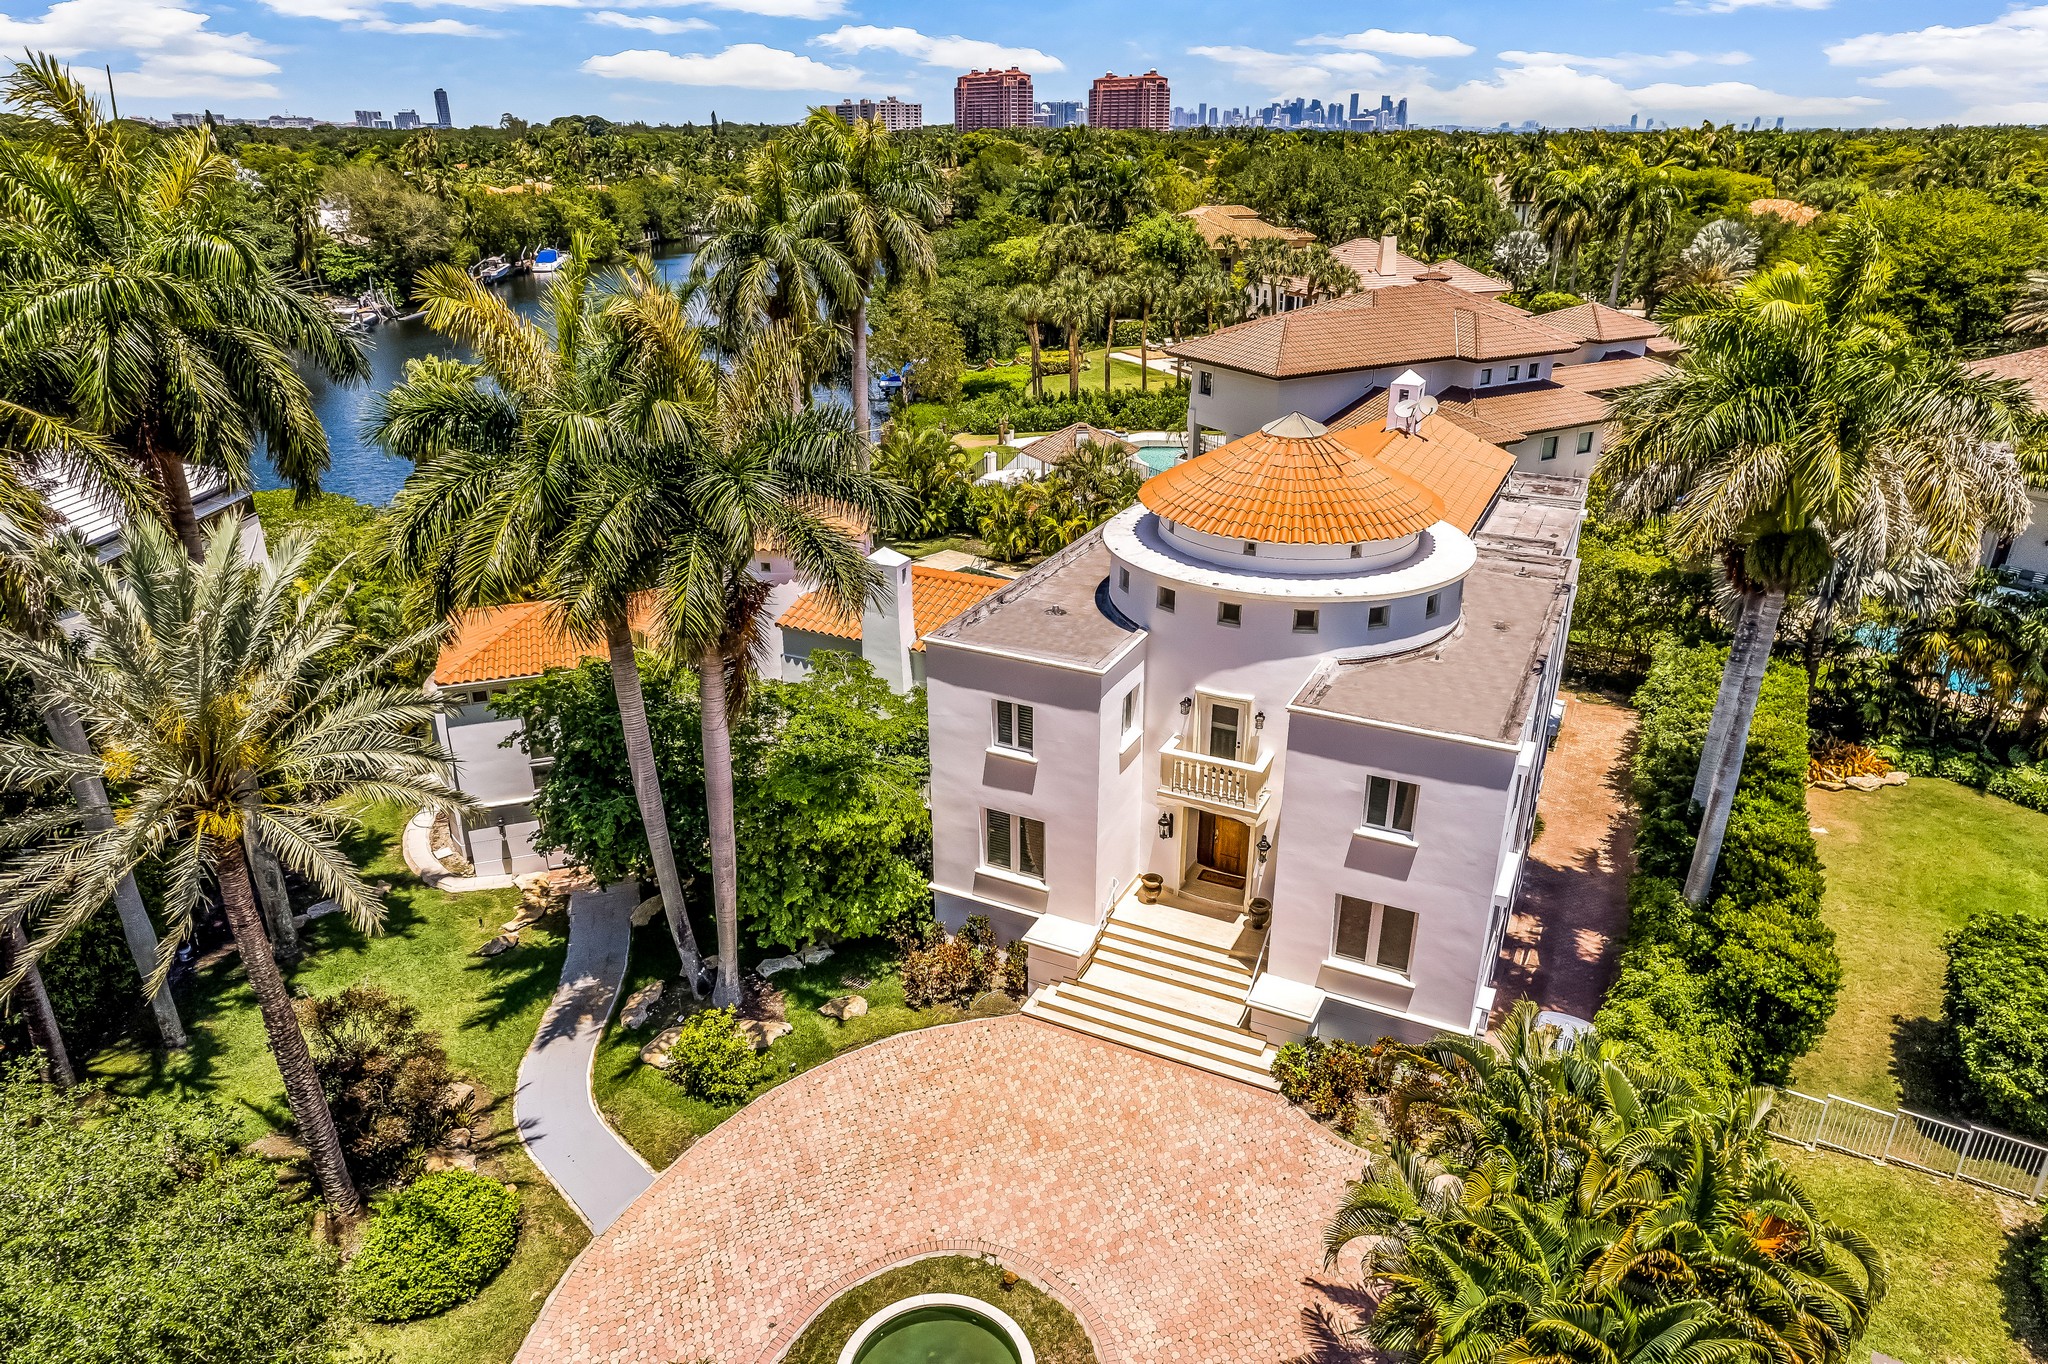 431 Costanera Rd, Coral Gables, FL